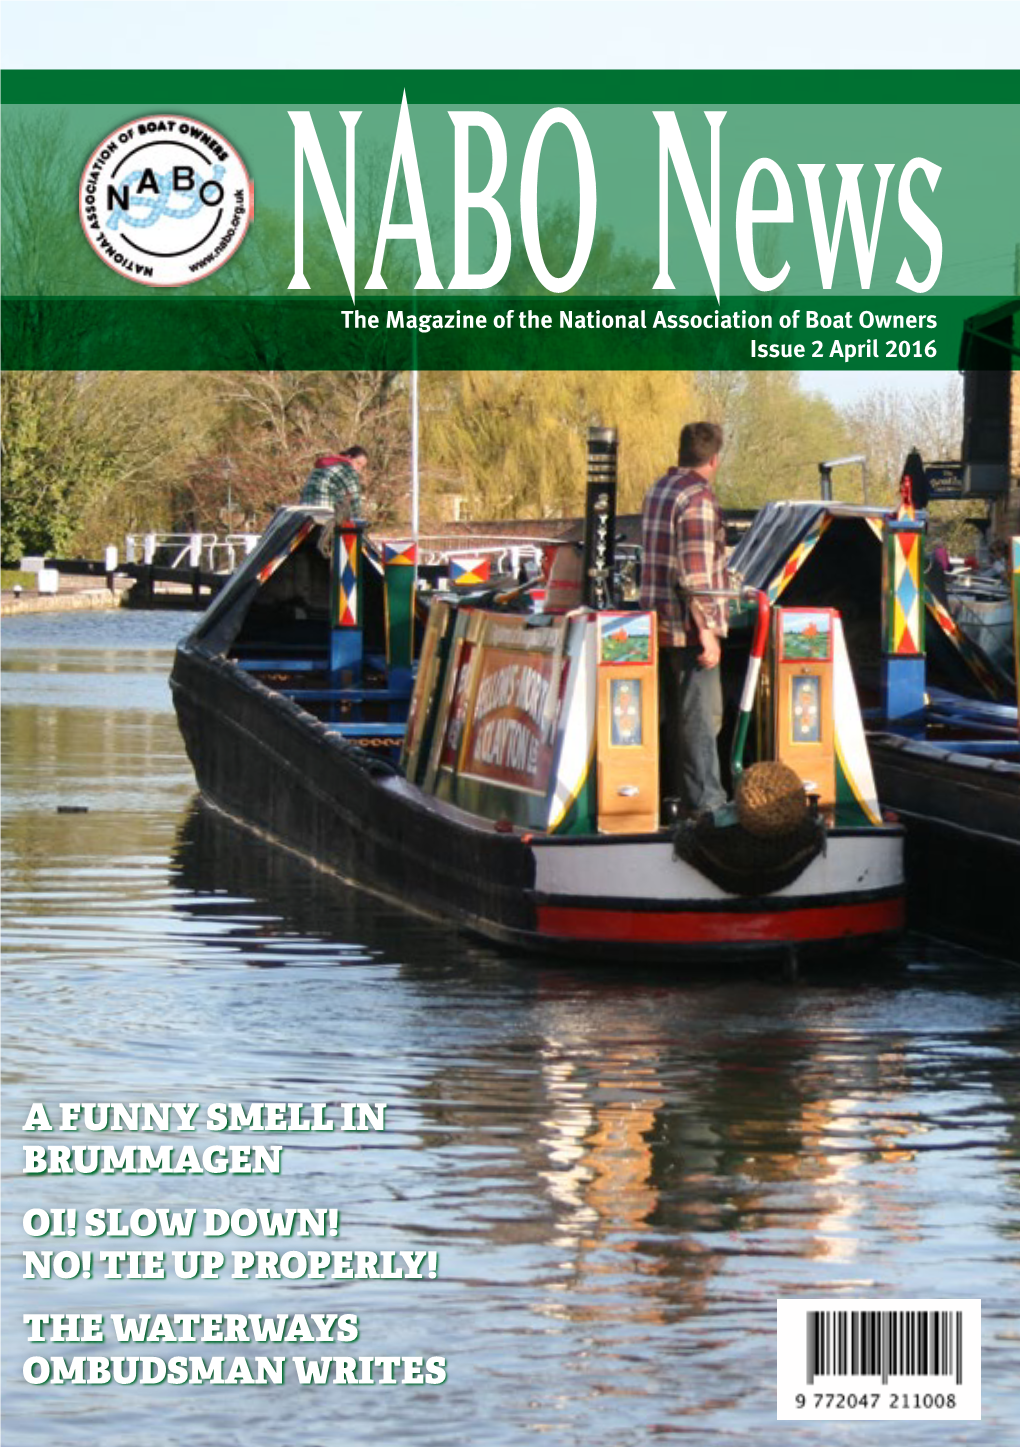 NABO News Issue 2 April 2016 NABO News the Magazine of the National Association of Boat Owners Issue 2 April 2016